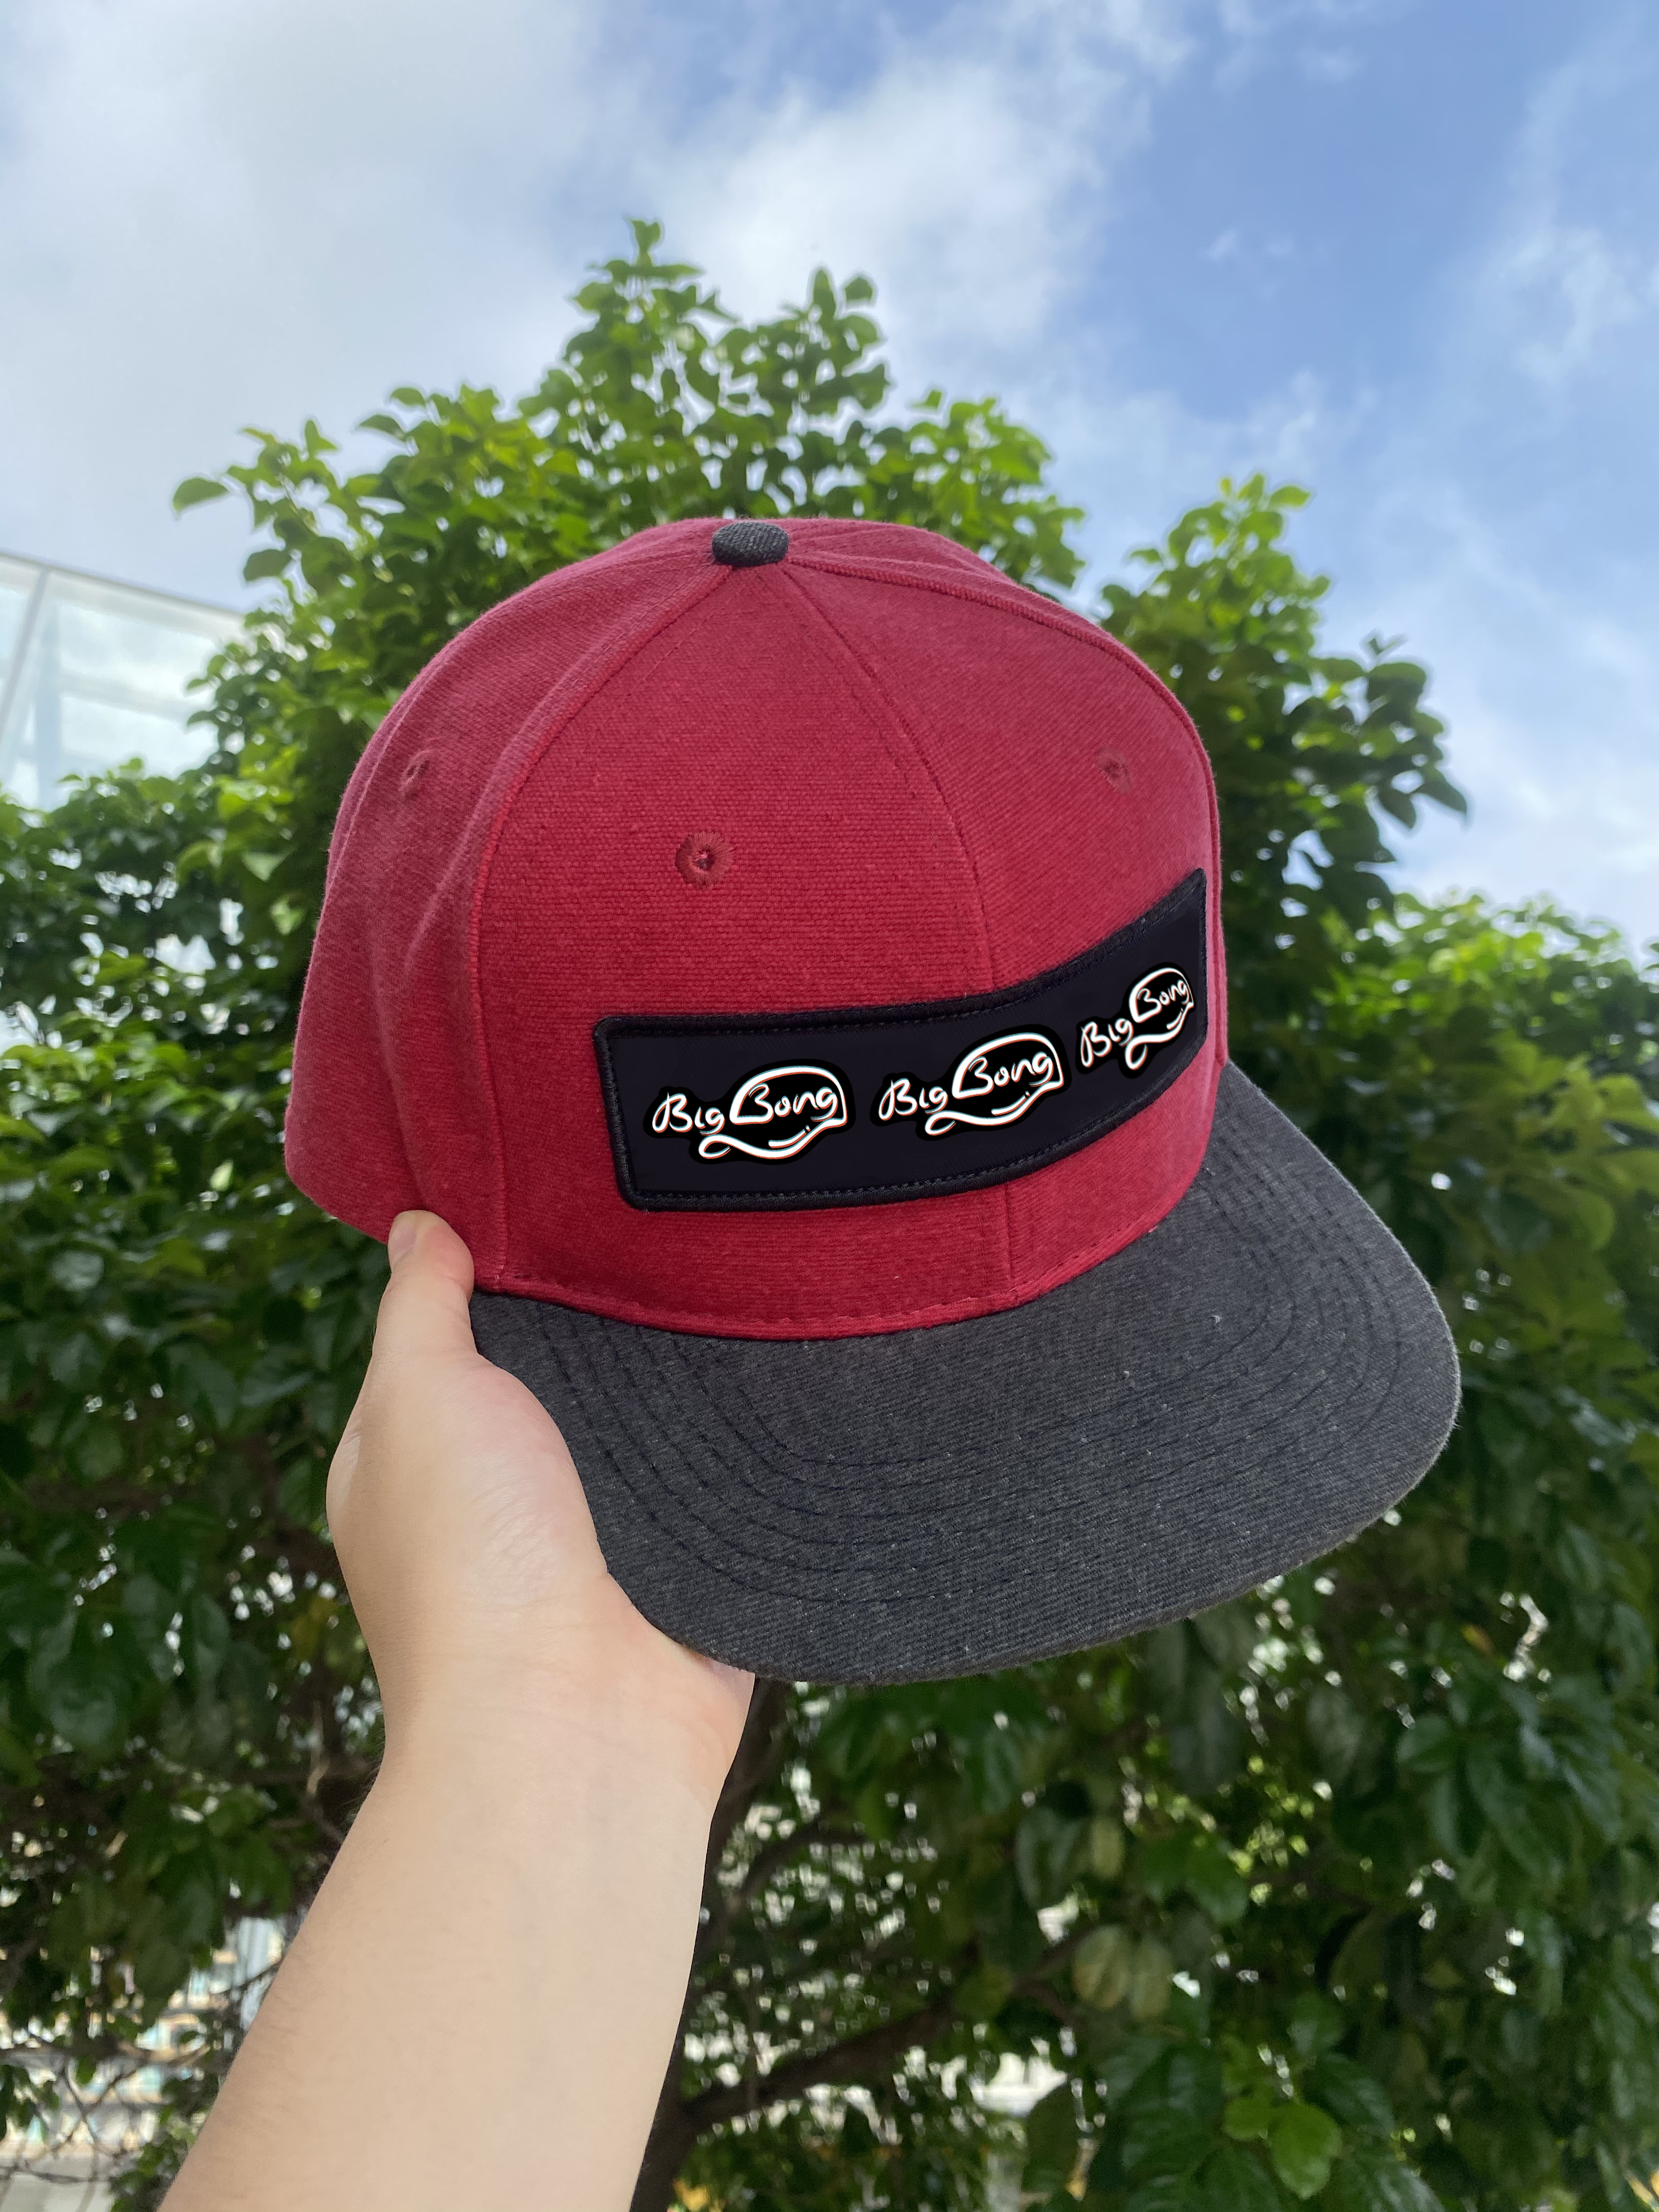 The embroidery logo Mouscap Organic cotton blank cap